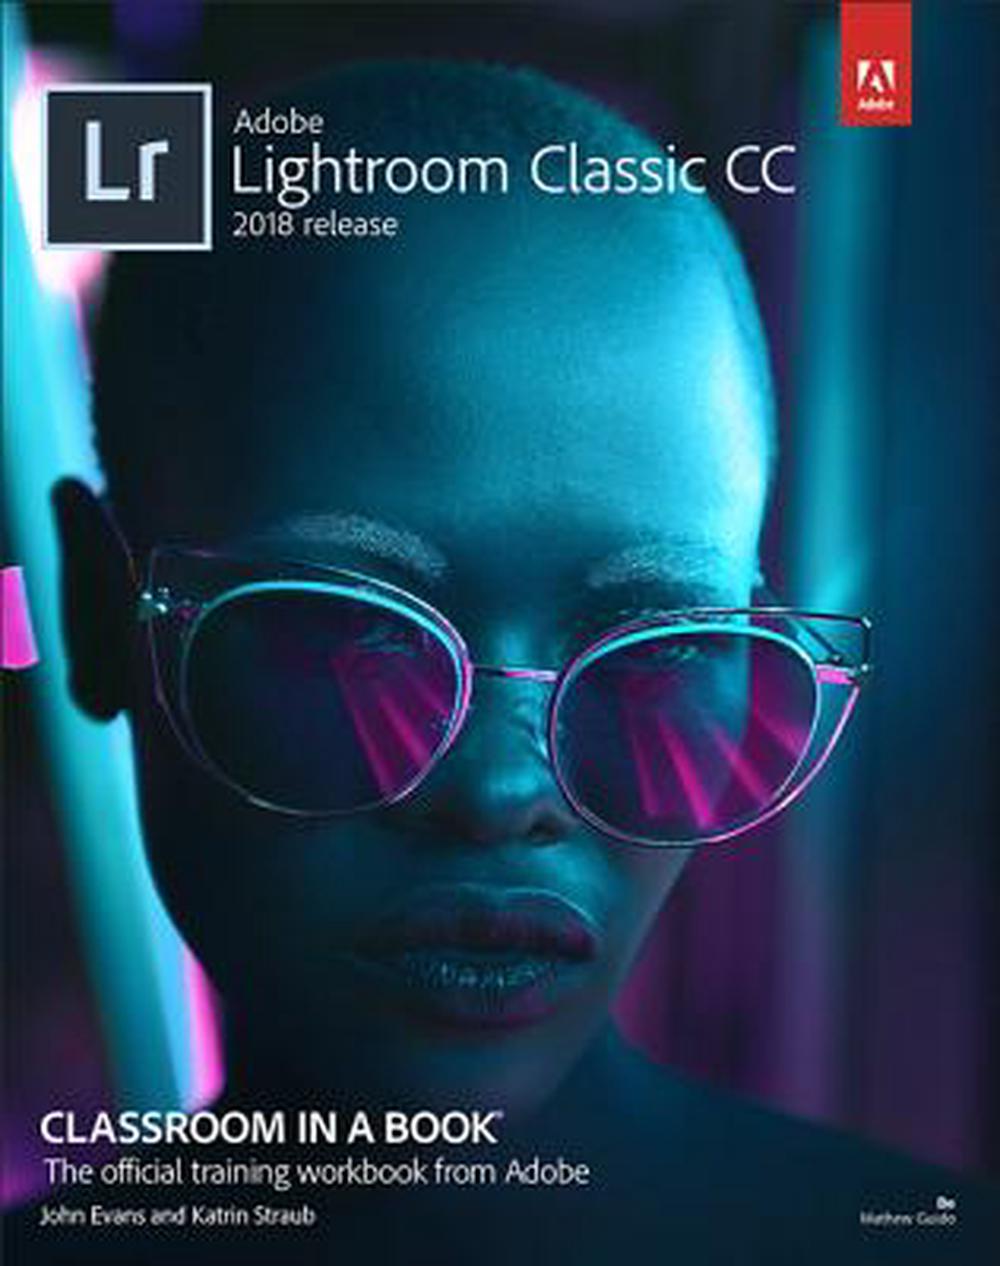 download adobe photoshop lightroom classic cc classroom in a book 2018 pdf